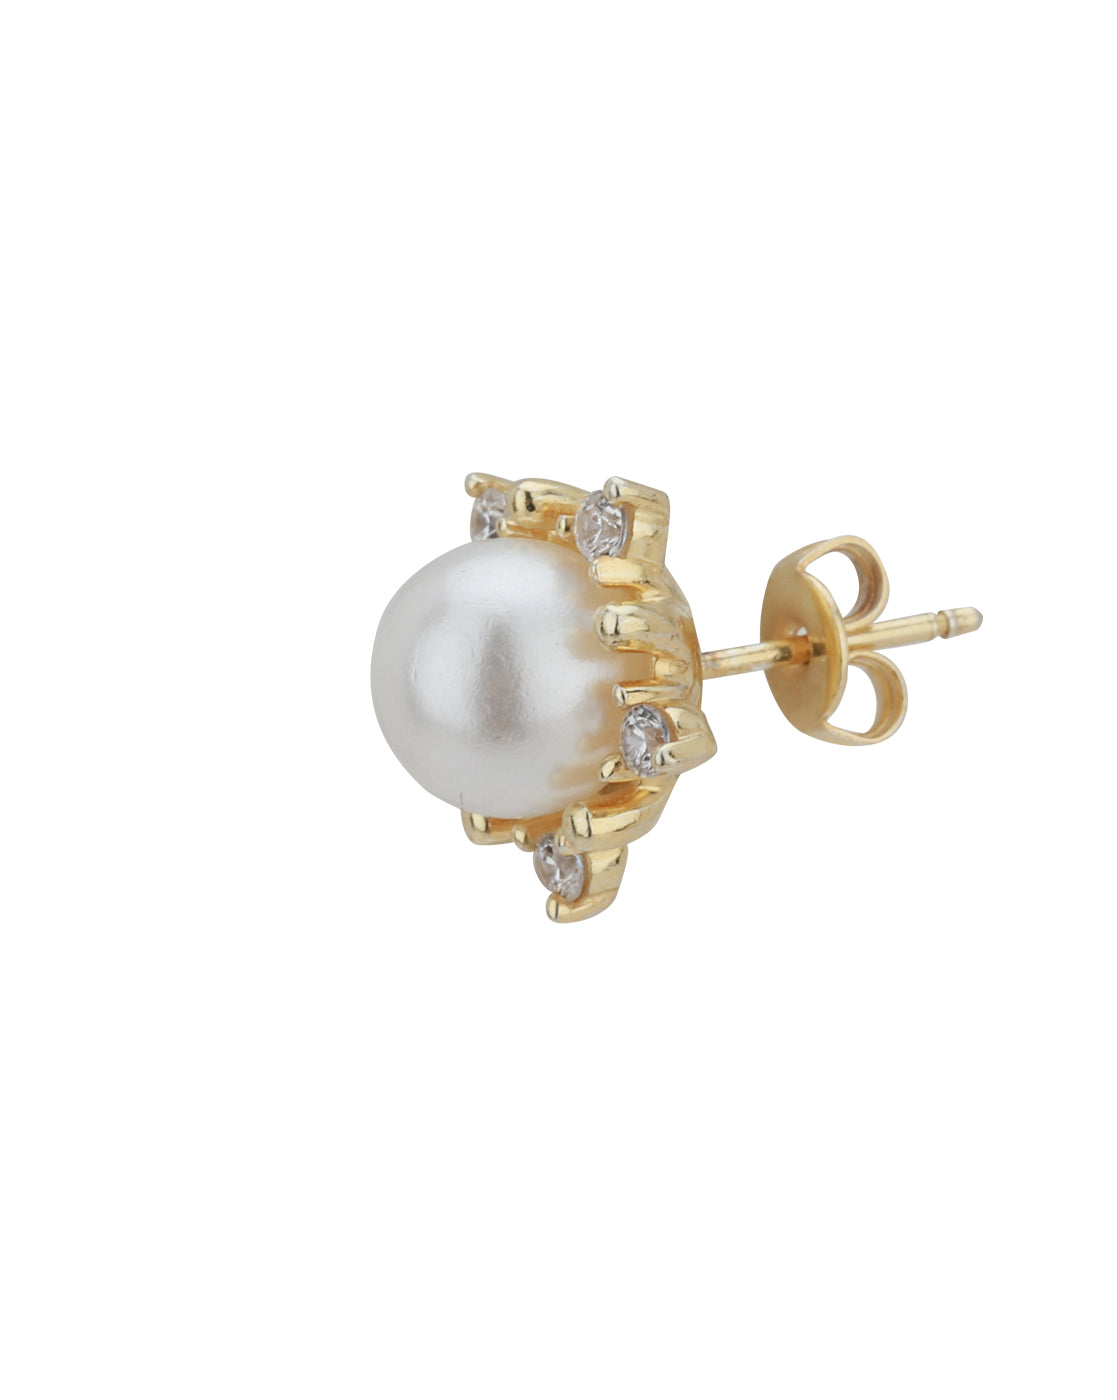 Carlton London Gold Plated Cz White Pearl Stud Earring For Women